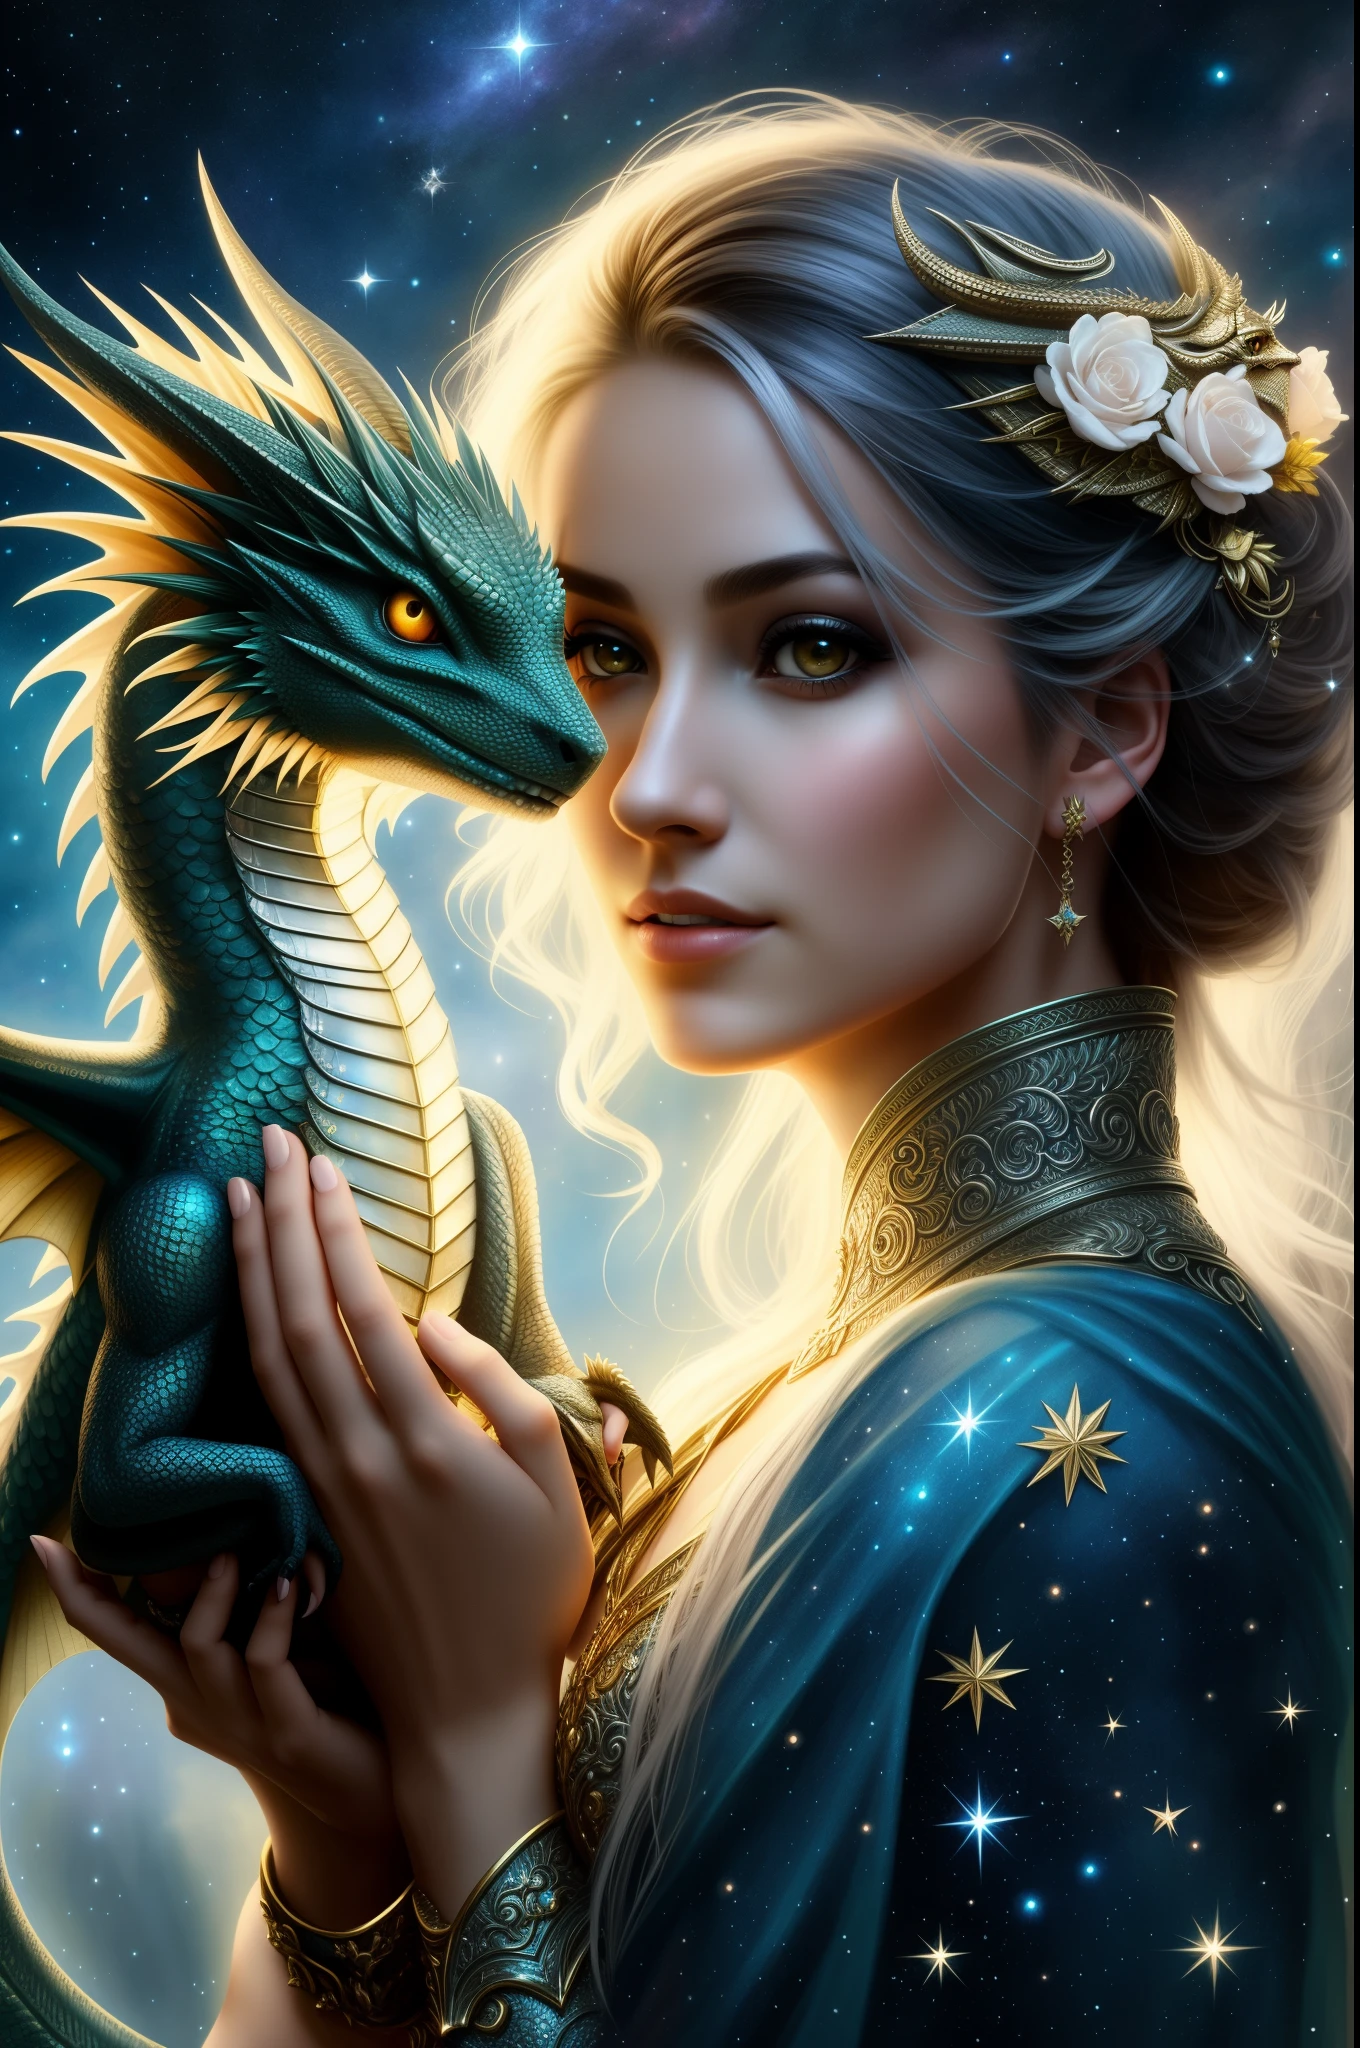 there is a dragon that is sitting in front of a clock, dragon portrait, dragon art, chinese dragon concept art, colossal dragon as background, loong, collectible card art, cyborg dragon portrait, detailed fantasy digital art, 4k detailed digital art, 8k high quality detailed art, 4 k detail fantasy, 4k highly detailed digital art, epic fantasy digital art style